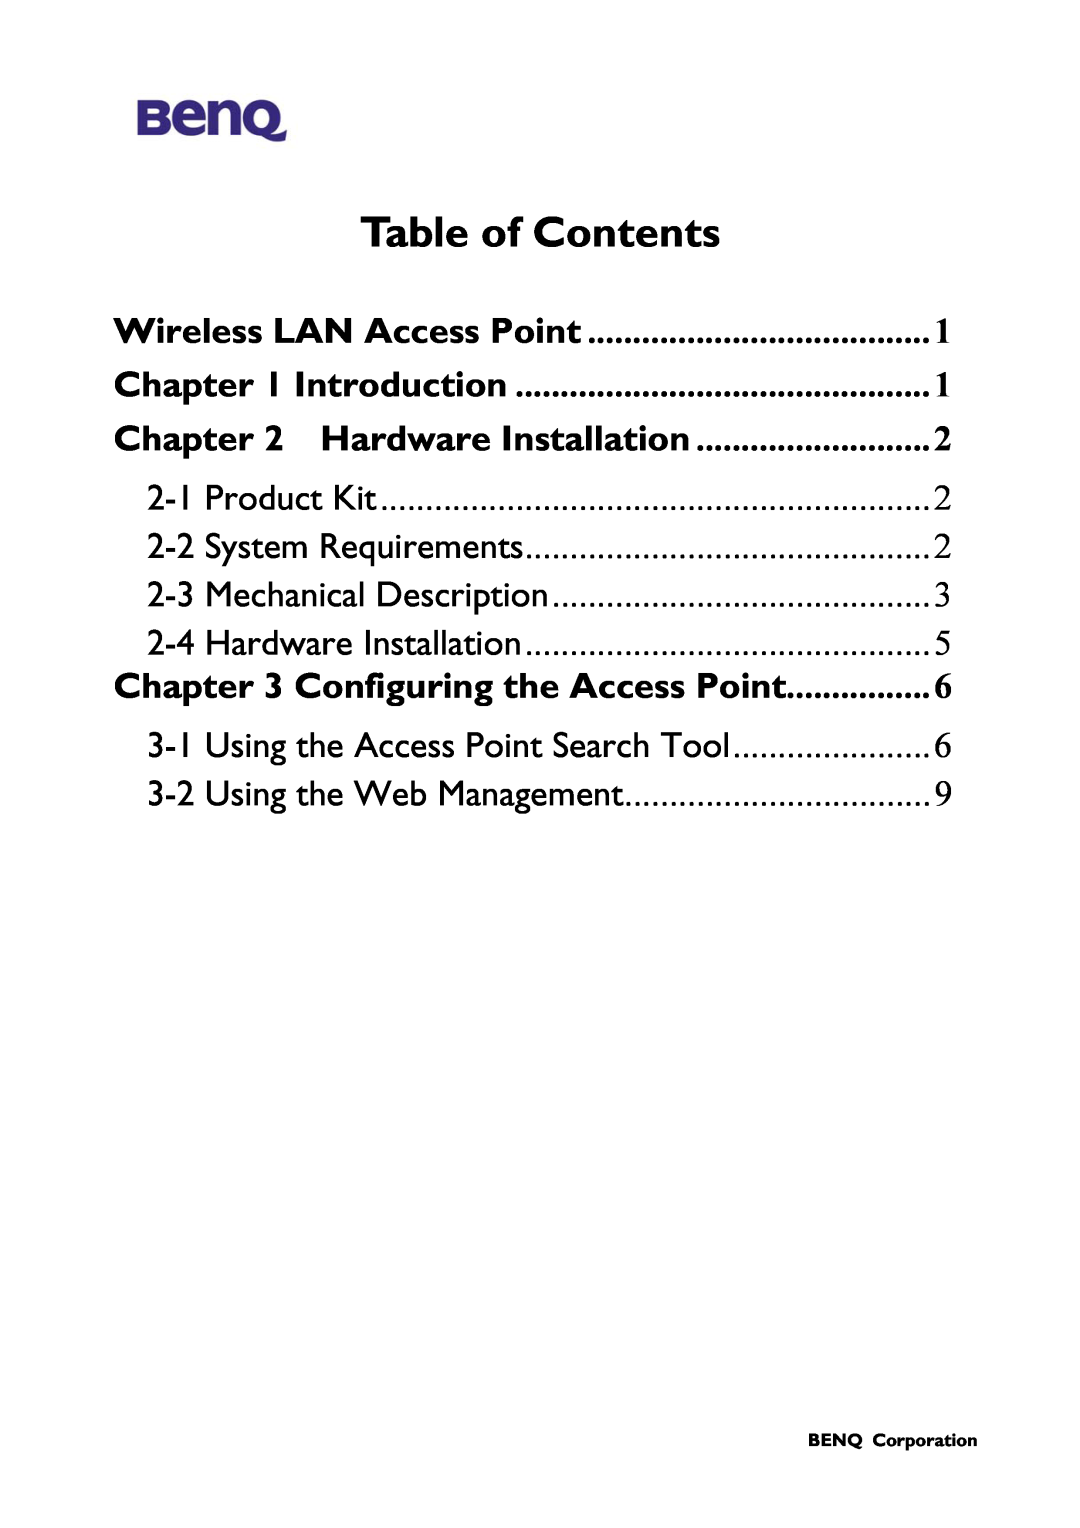 BenQ AWL-500 Chapter, Table of Contents, Hardware Installation, Wireless LAN Access Point, Introduction, Product Kit 